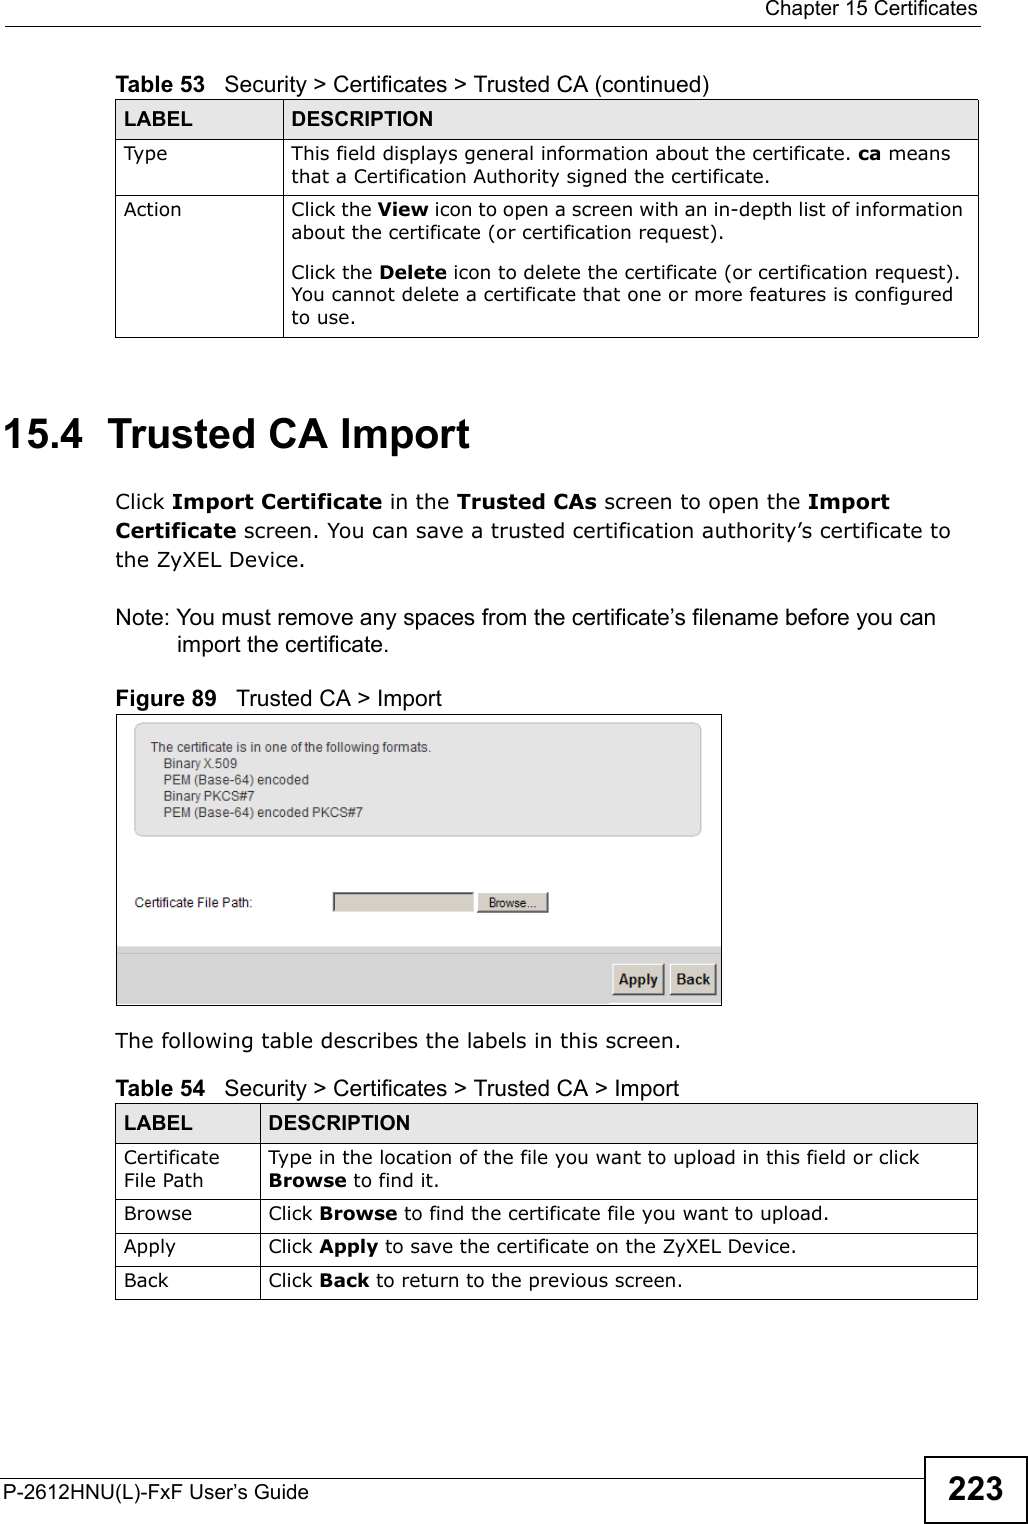  Chapter 15 CertificatesP-2612HNU(L)-FxF User’s Guide 22315.4  Trusted CA Import   Click Import Certificate in the Trusted CAs screen to open the ImportCertificate screen. You can save a trusted certification authority’s certificate to the ZyXEL Device.Note: You must remove any spaces from the certificate’s filename before you can import the certificate.Figure 89   Trusted CA &gt; ImportThe following table describes the labels in this screen.Type This field displays general information about the certificate. ca means that a Certification Authority signed the certificate.Action Click the View icon to open a screen with an in-depth list of information about the certificate (or certification request).Click the Delete icon to delete the certificate (or certification request). You cannot delete a certificate that one or more features is configured to use.Table 53   Security &gt; Certificates &gt; Trusted CA (continued)LABEL DESCRIPTIONTable 54   Security &gt; Certificates &gt; Trusted CA &gt; ImportLABEL DESCRIPTIONCertificateFile PathType in the location of the file you want to upload in this field or click Browse to find it.Browse  Click Browse to find the certificate file you want to upload. Apply Click Apply to save the certificate on the ZyXEL Device.Back Click Back to return to the previous screen.